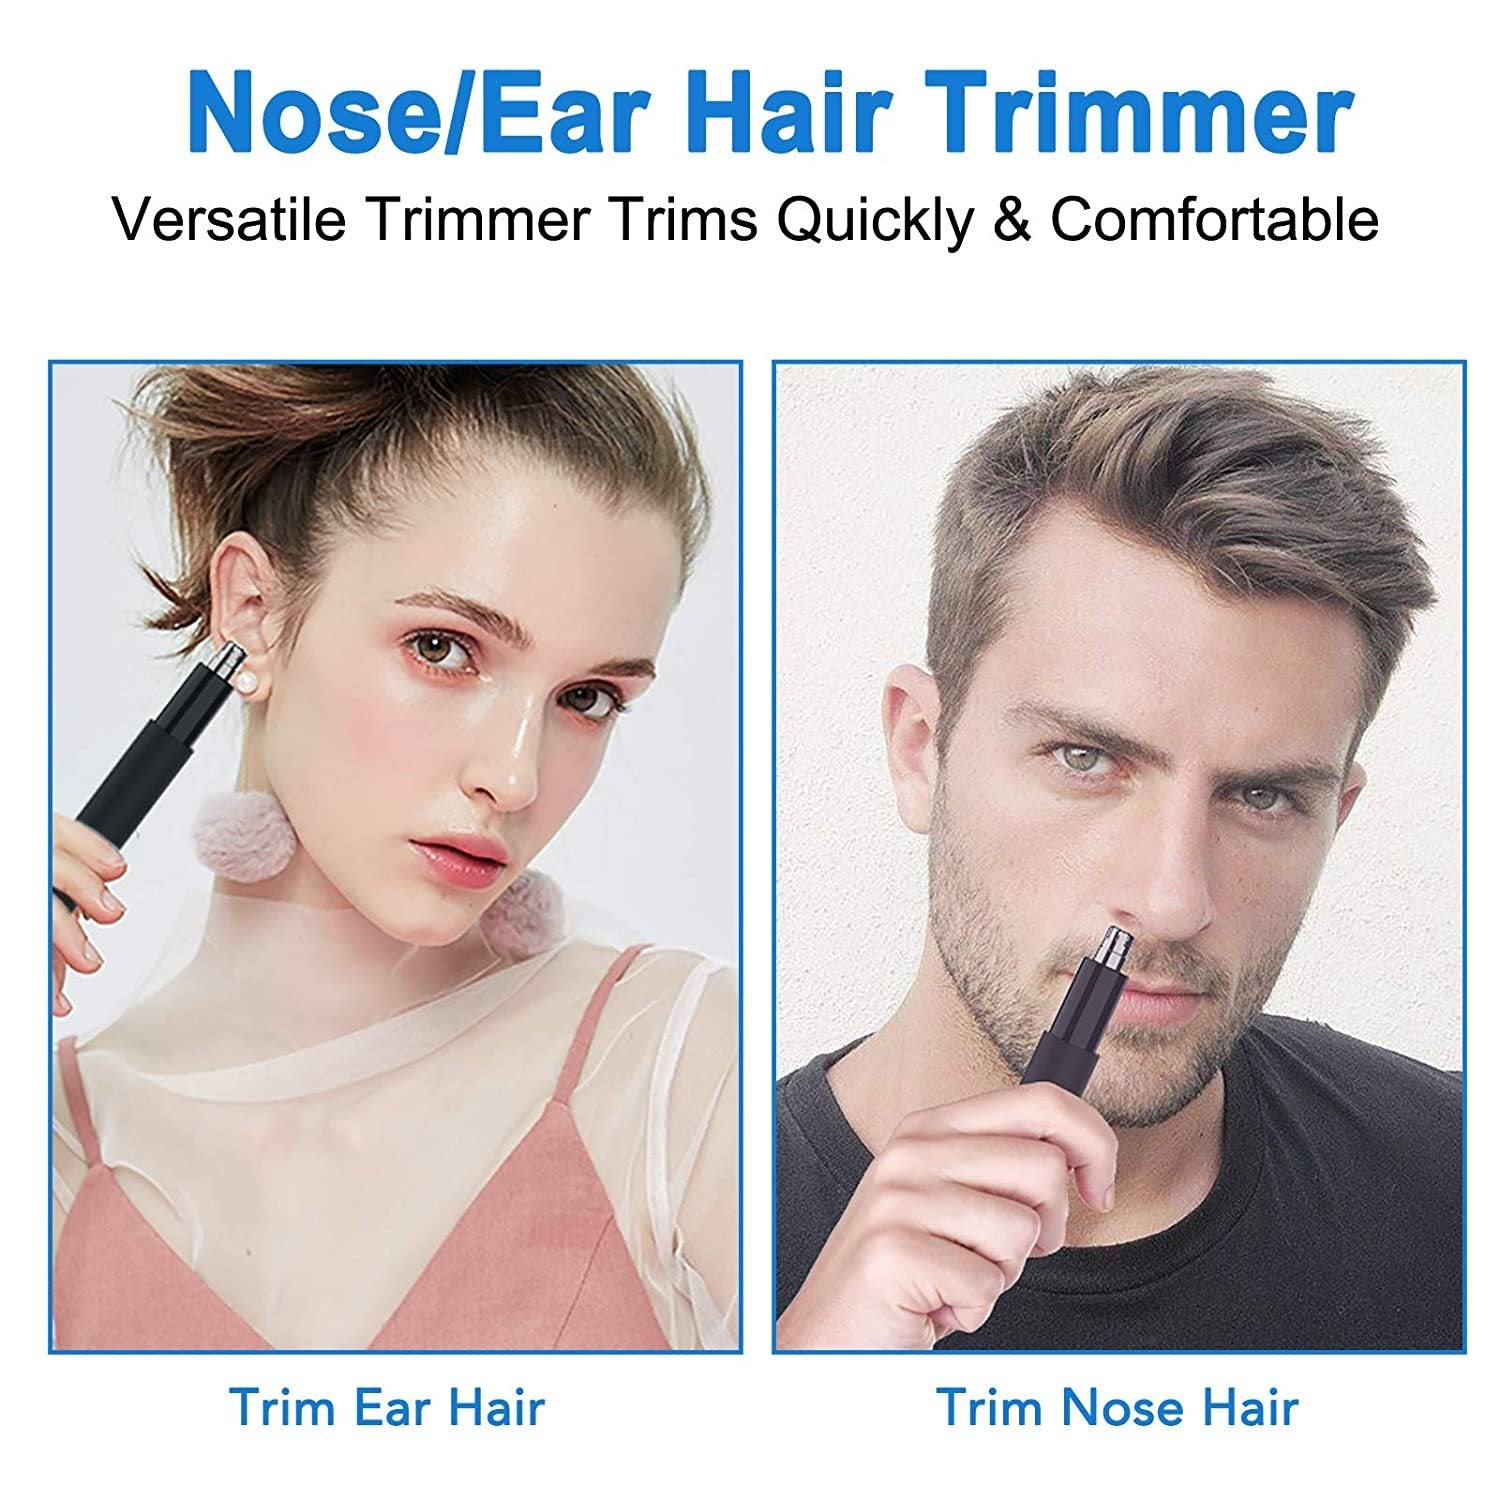 Ear And Nose Hair Tmmer For Men And Women-2020, Professional & Painless Nose Hair Clipper Remover With Stainless Steel Blad & IPX7 Waterproof System  Amazon Banned